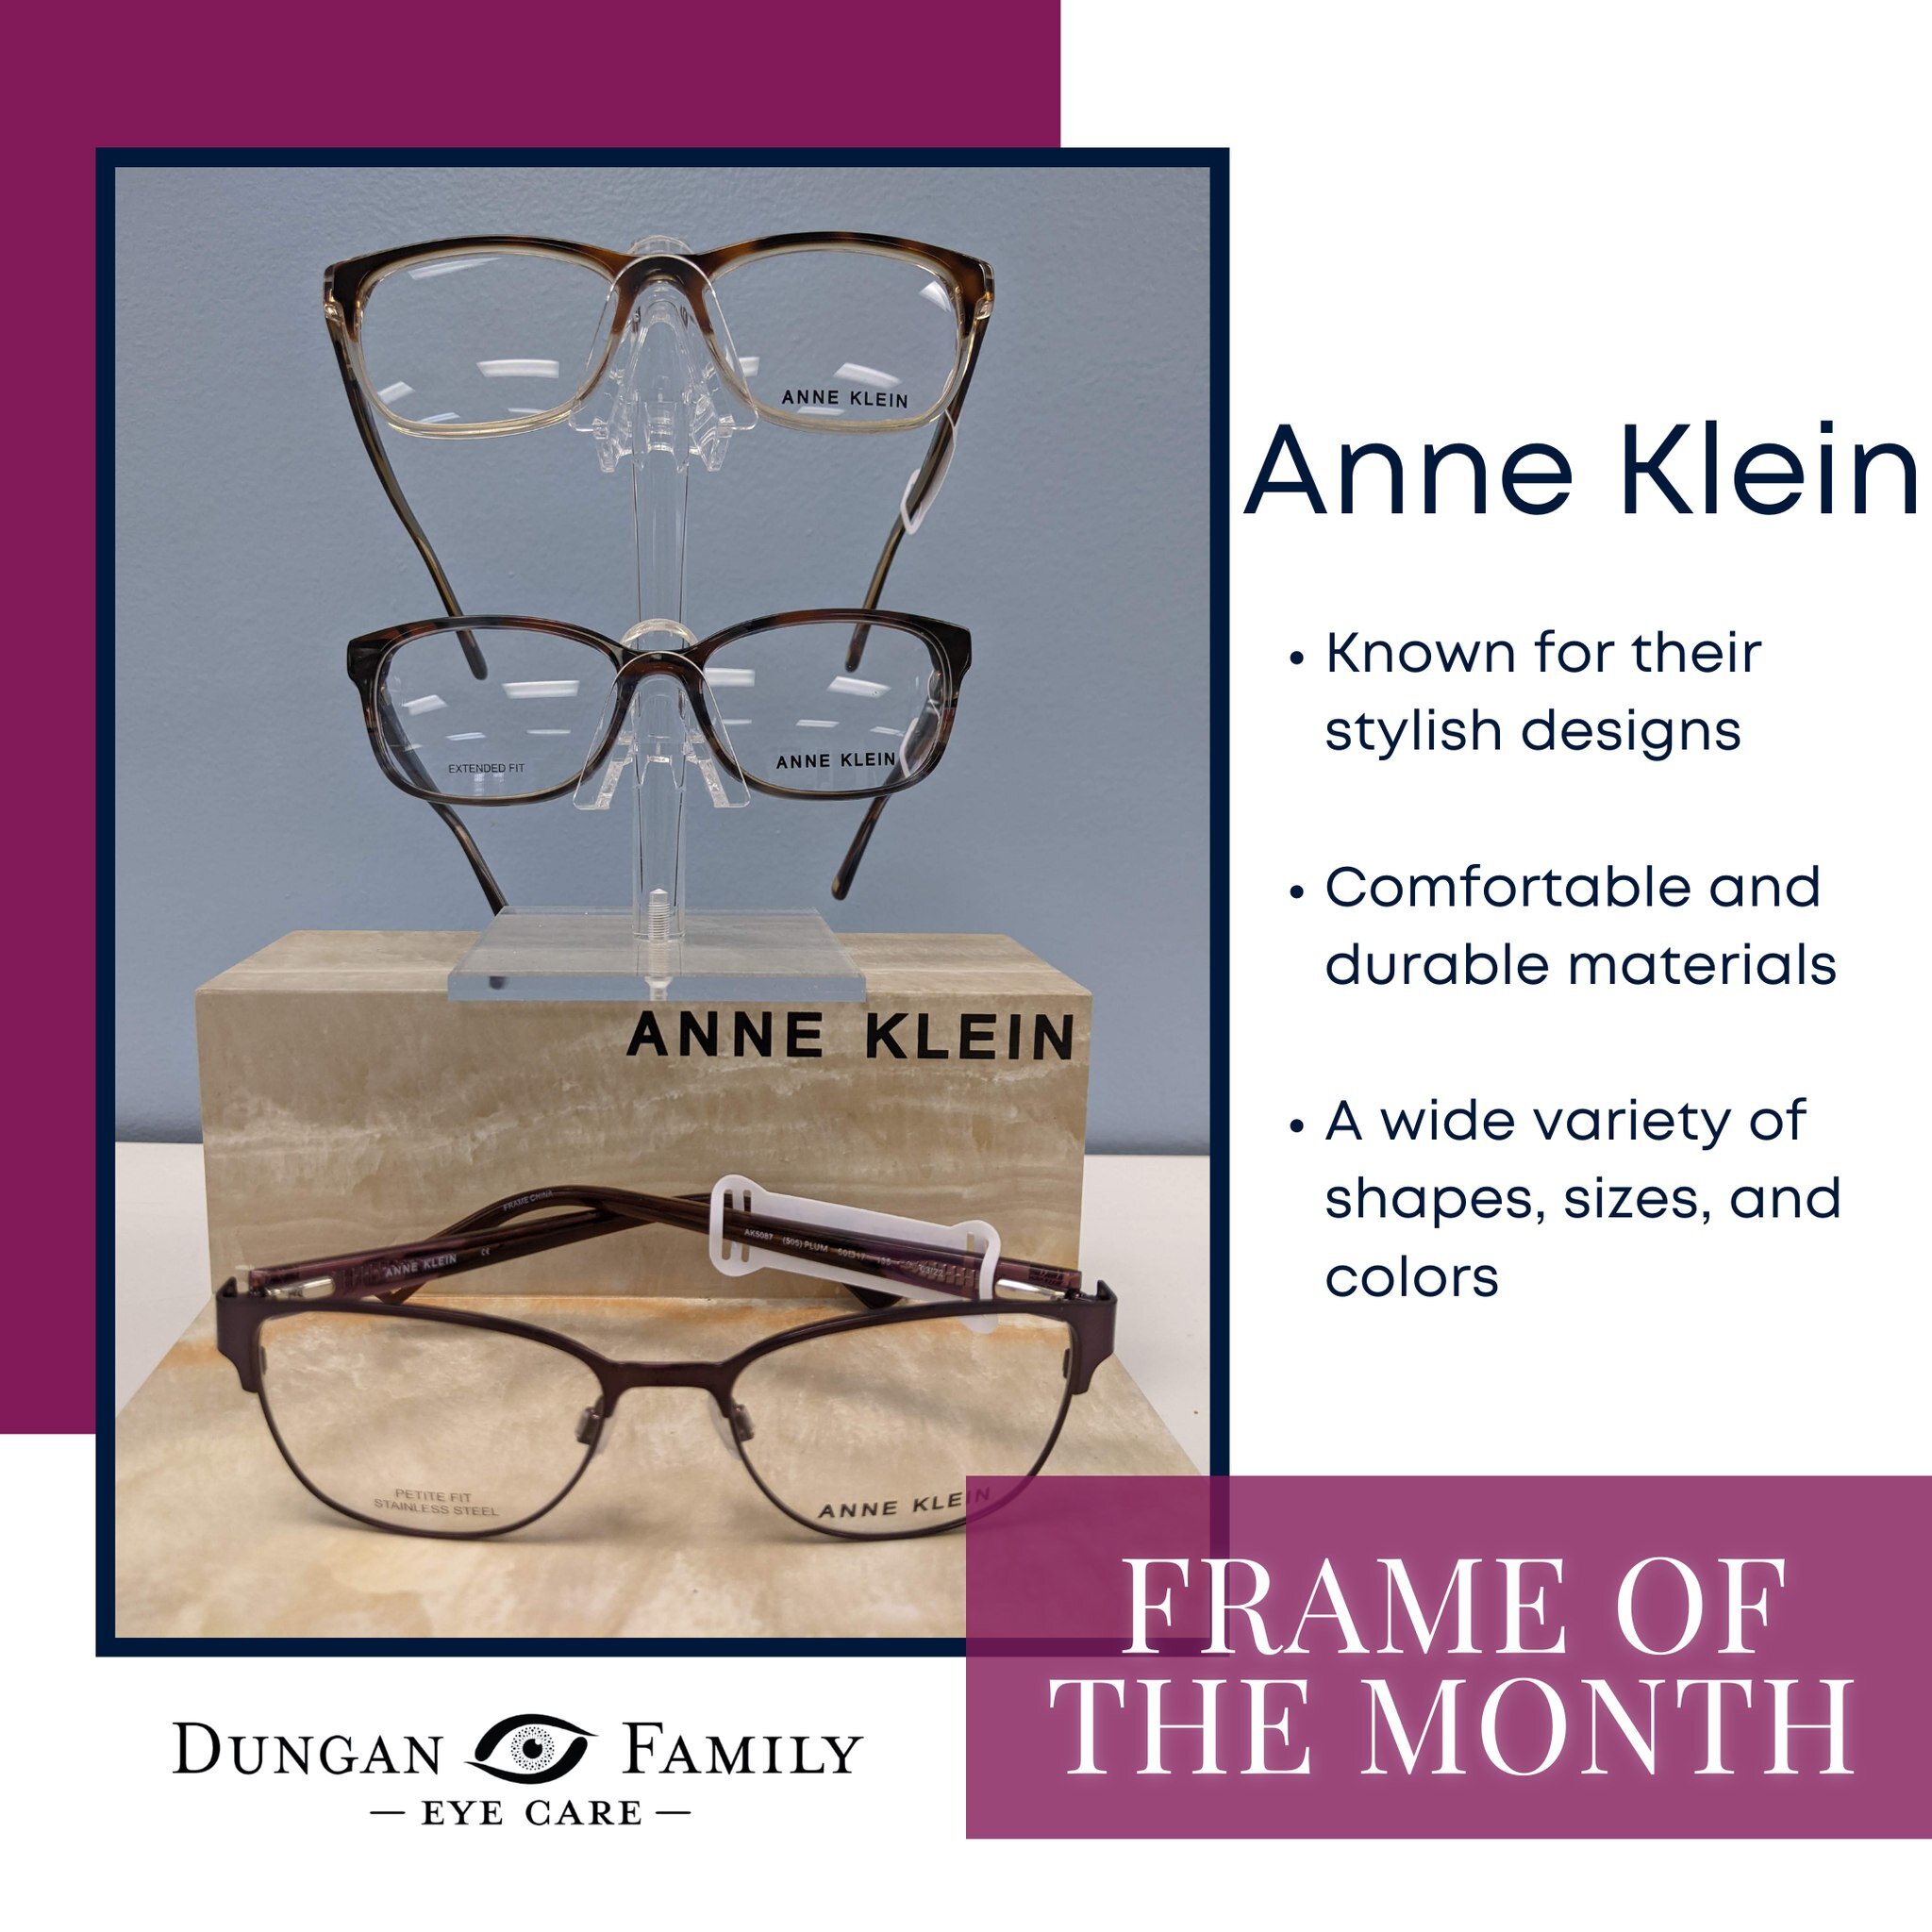 🌟 Frame of the Month: Anne Klein 🌟

Upgrade your eyewear style with our featured Frame of the Month &ndash; the elegant and timeless Anne Klein collection! These sophisticated frames showcase the perfect blend of fashion and function, making them a